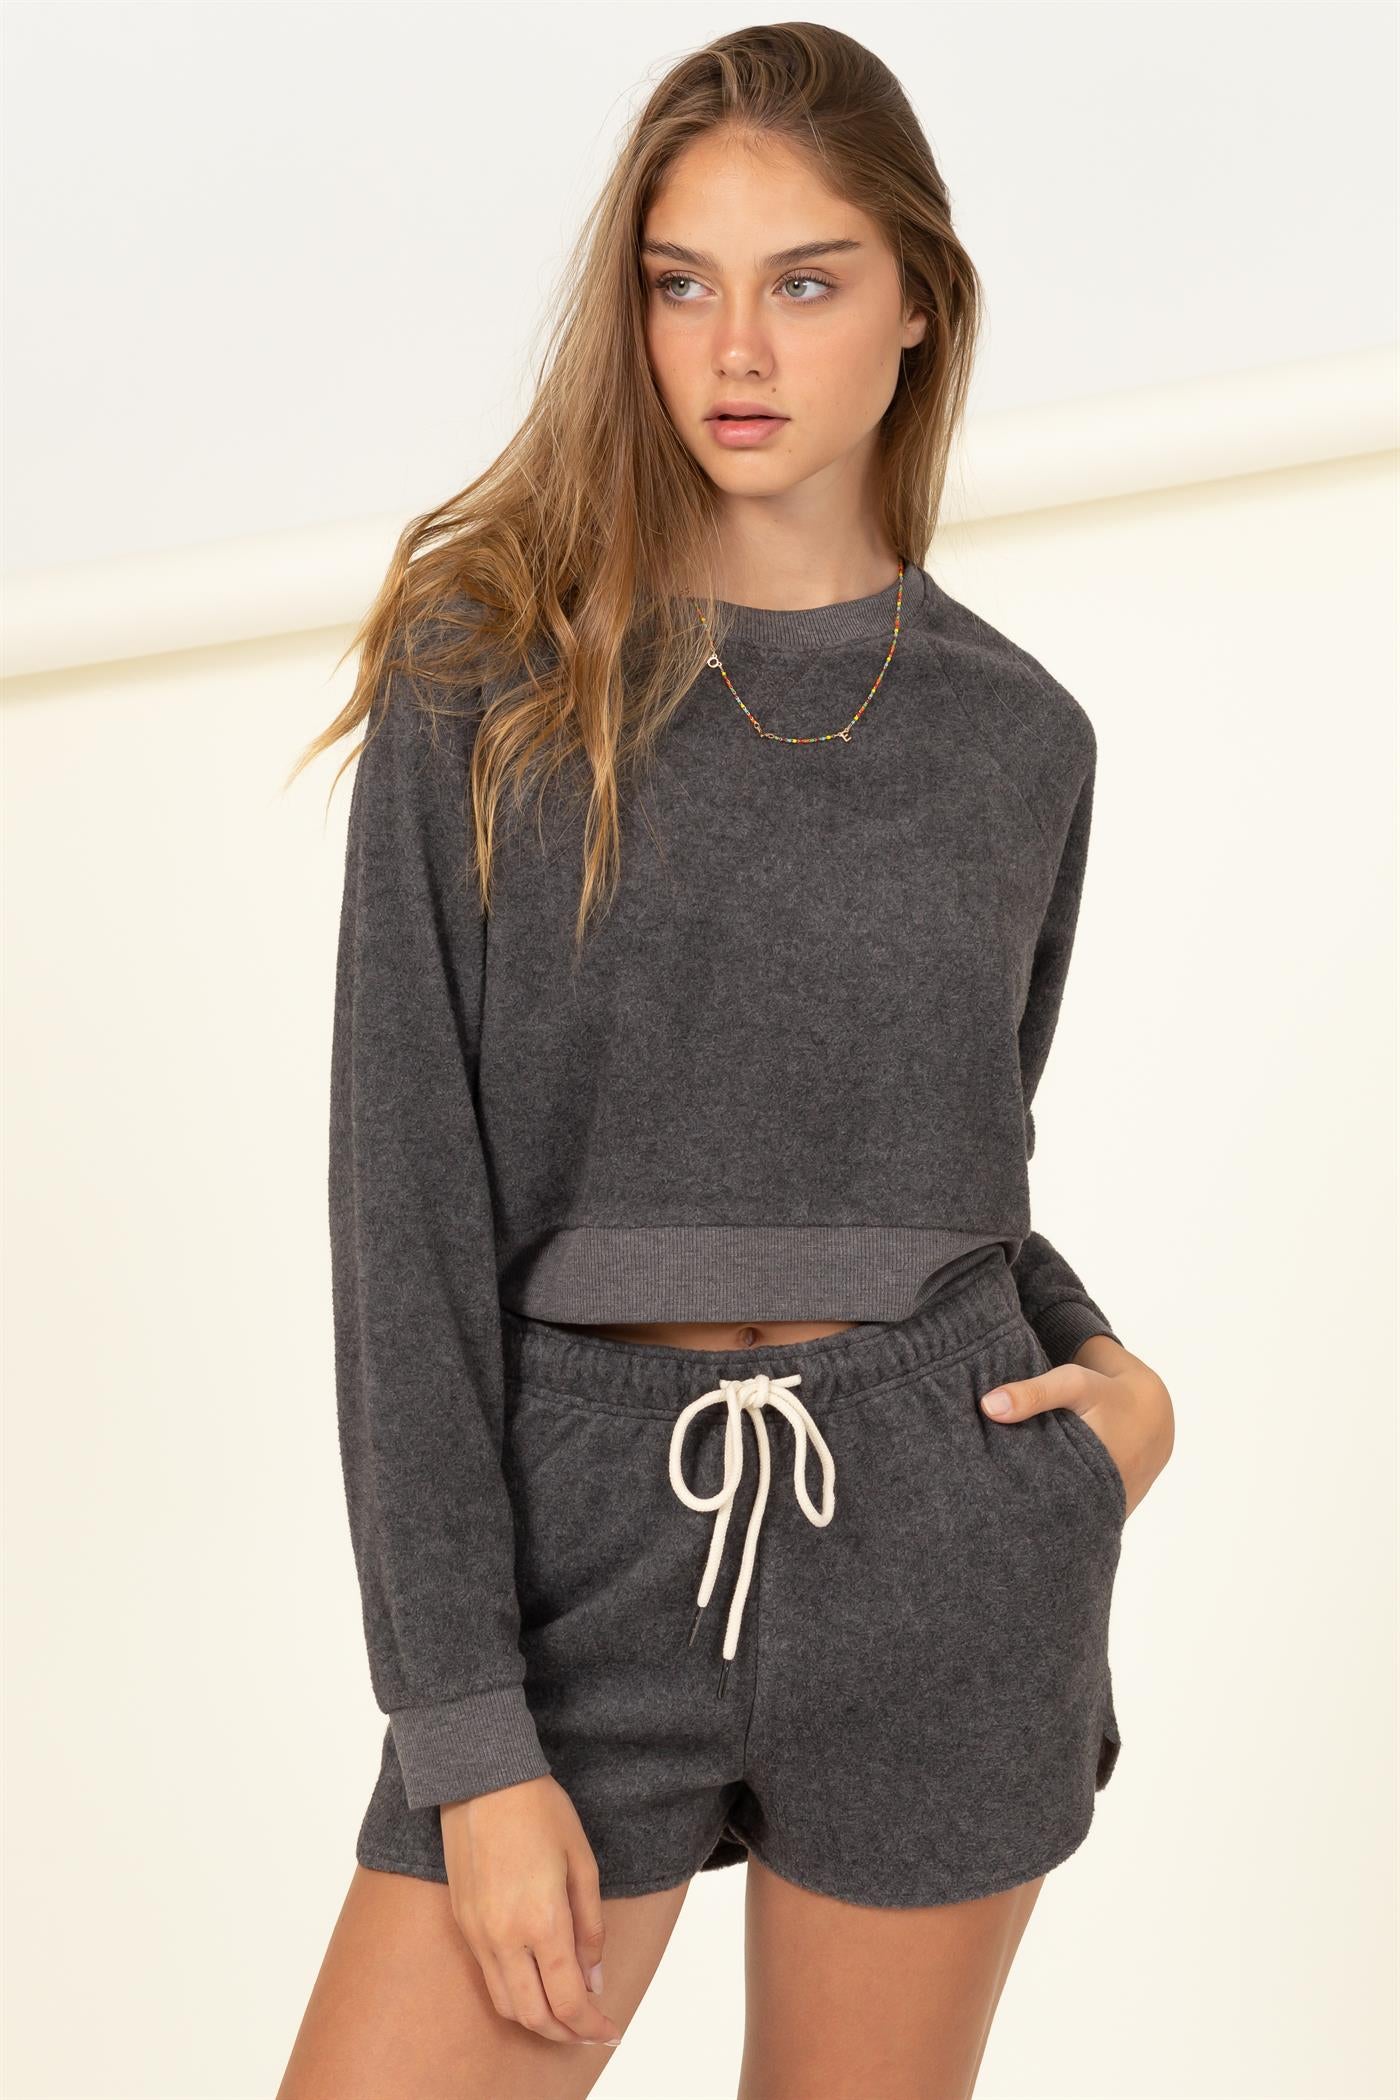 Cozy Long-Sleeve Top and Shorts 2-Piece Set